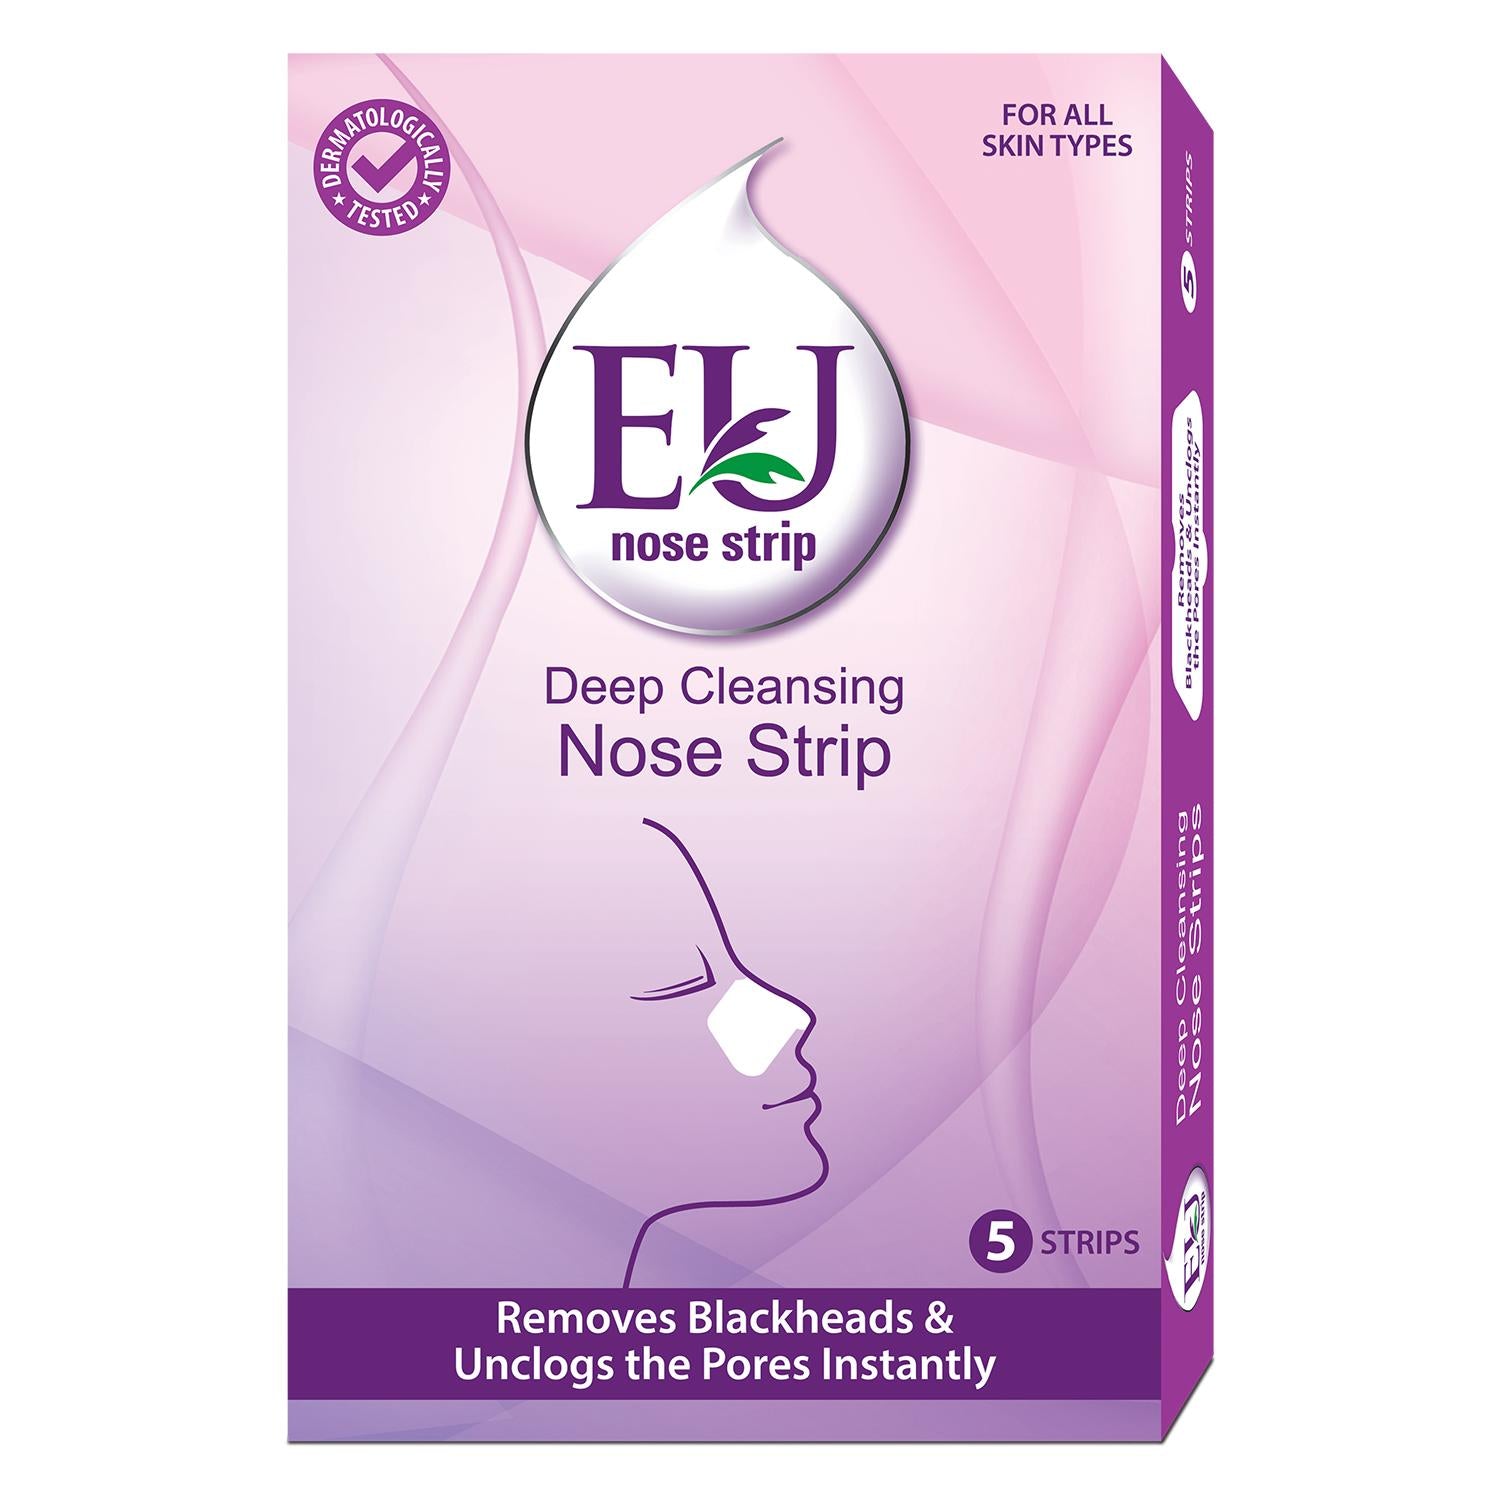 Buy  Eu Deep Cleansing Nose Strips (5 Strips) - at Best Price Online in Pakistan